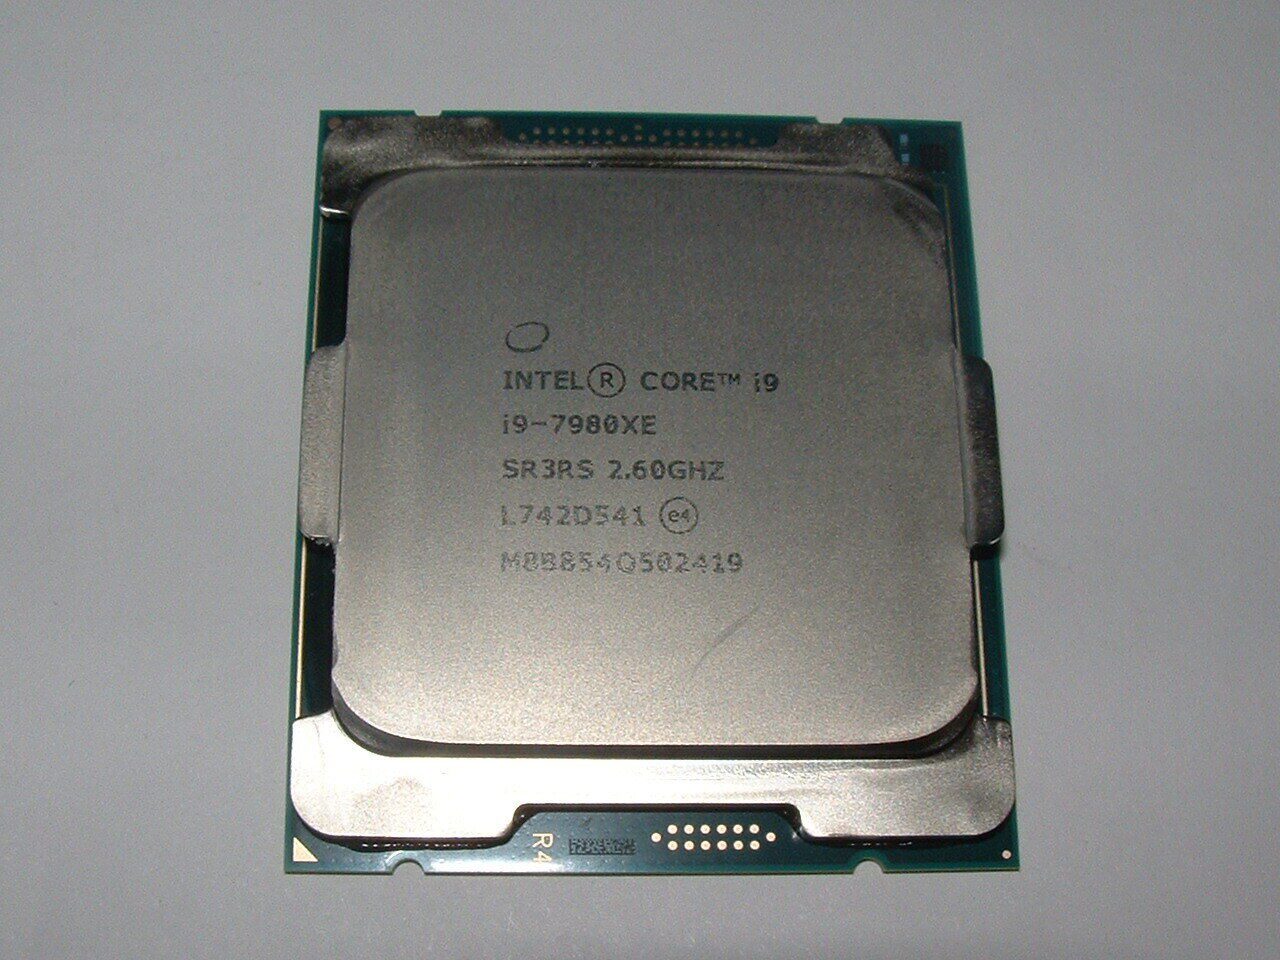 https://www.garlandcomputers.com/wp-content/uploads/imported/1/Intel-Core-i9-7980XE-Extreme-Edition-26GHz-LGA2066-18-Core-CPUProcessor-SR3RS-373956156321.jpg